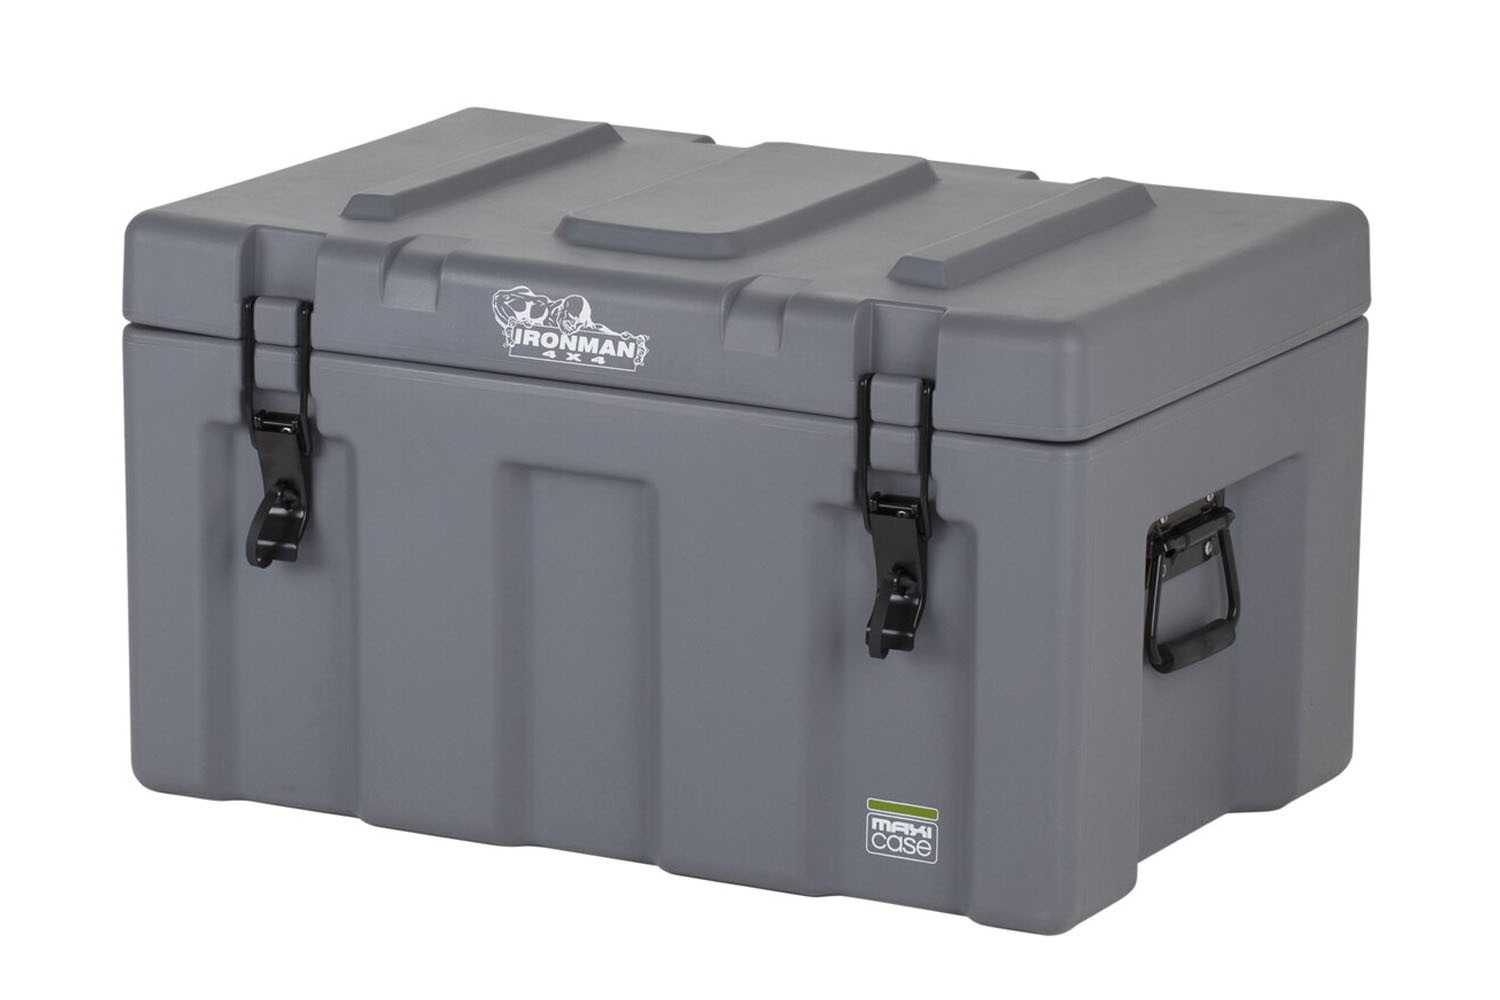 All-Weather Rugged Case - 100L Questions & Answers